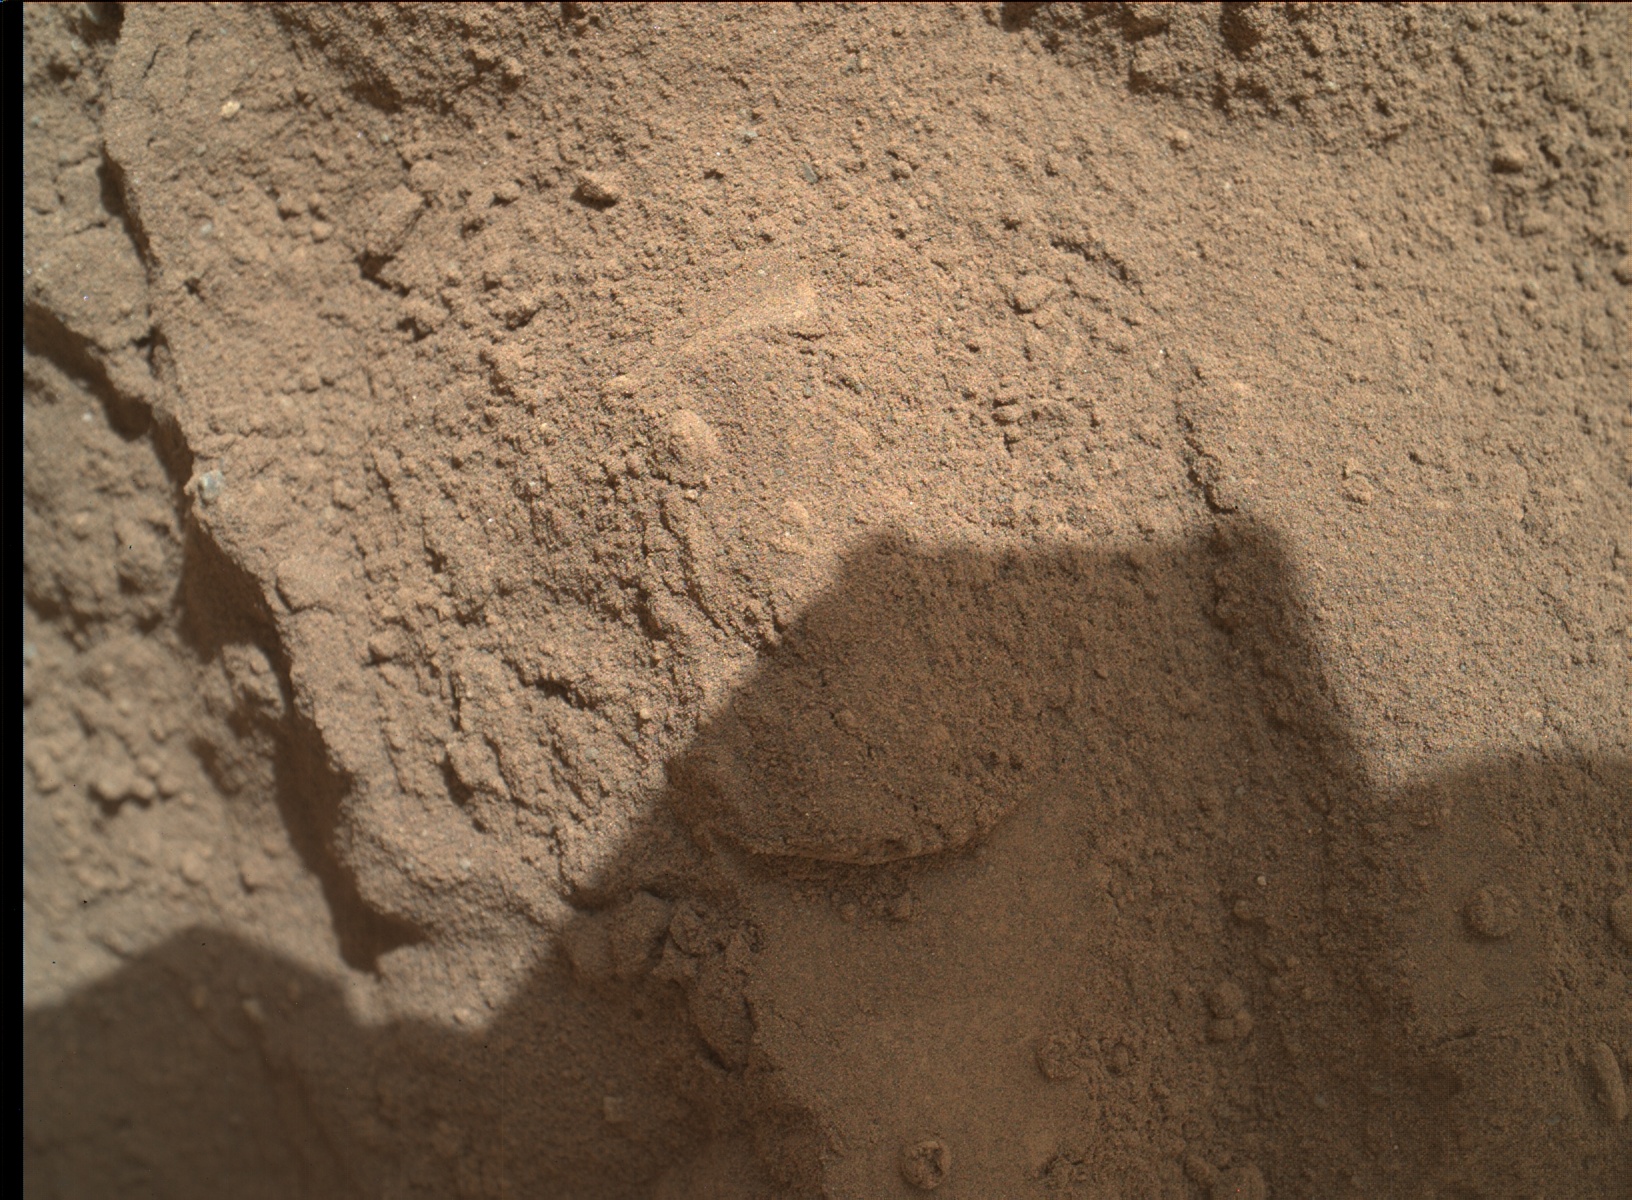 Nasa's Mars rover Curiosity acquired this image using its Mars Hand Lens Imager (MAHLI) on Sol 674